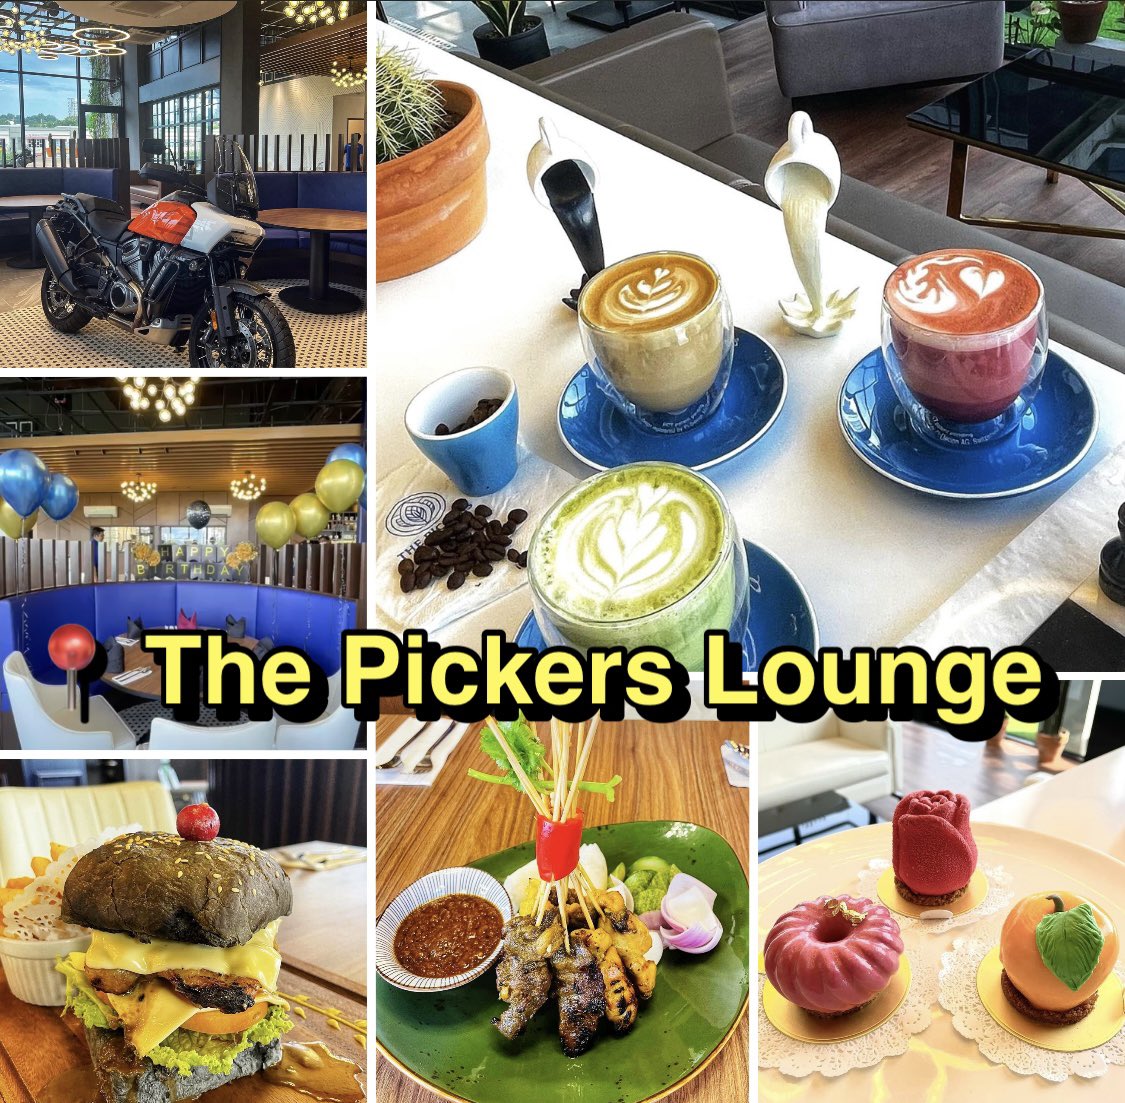 The pickers lounge